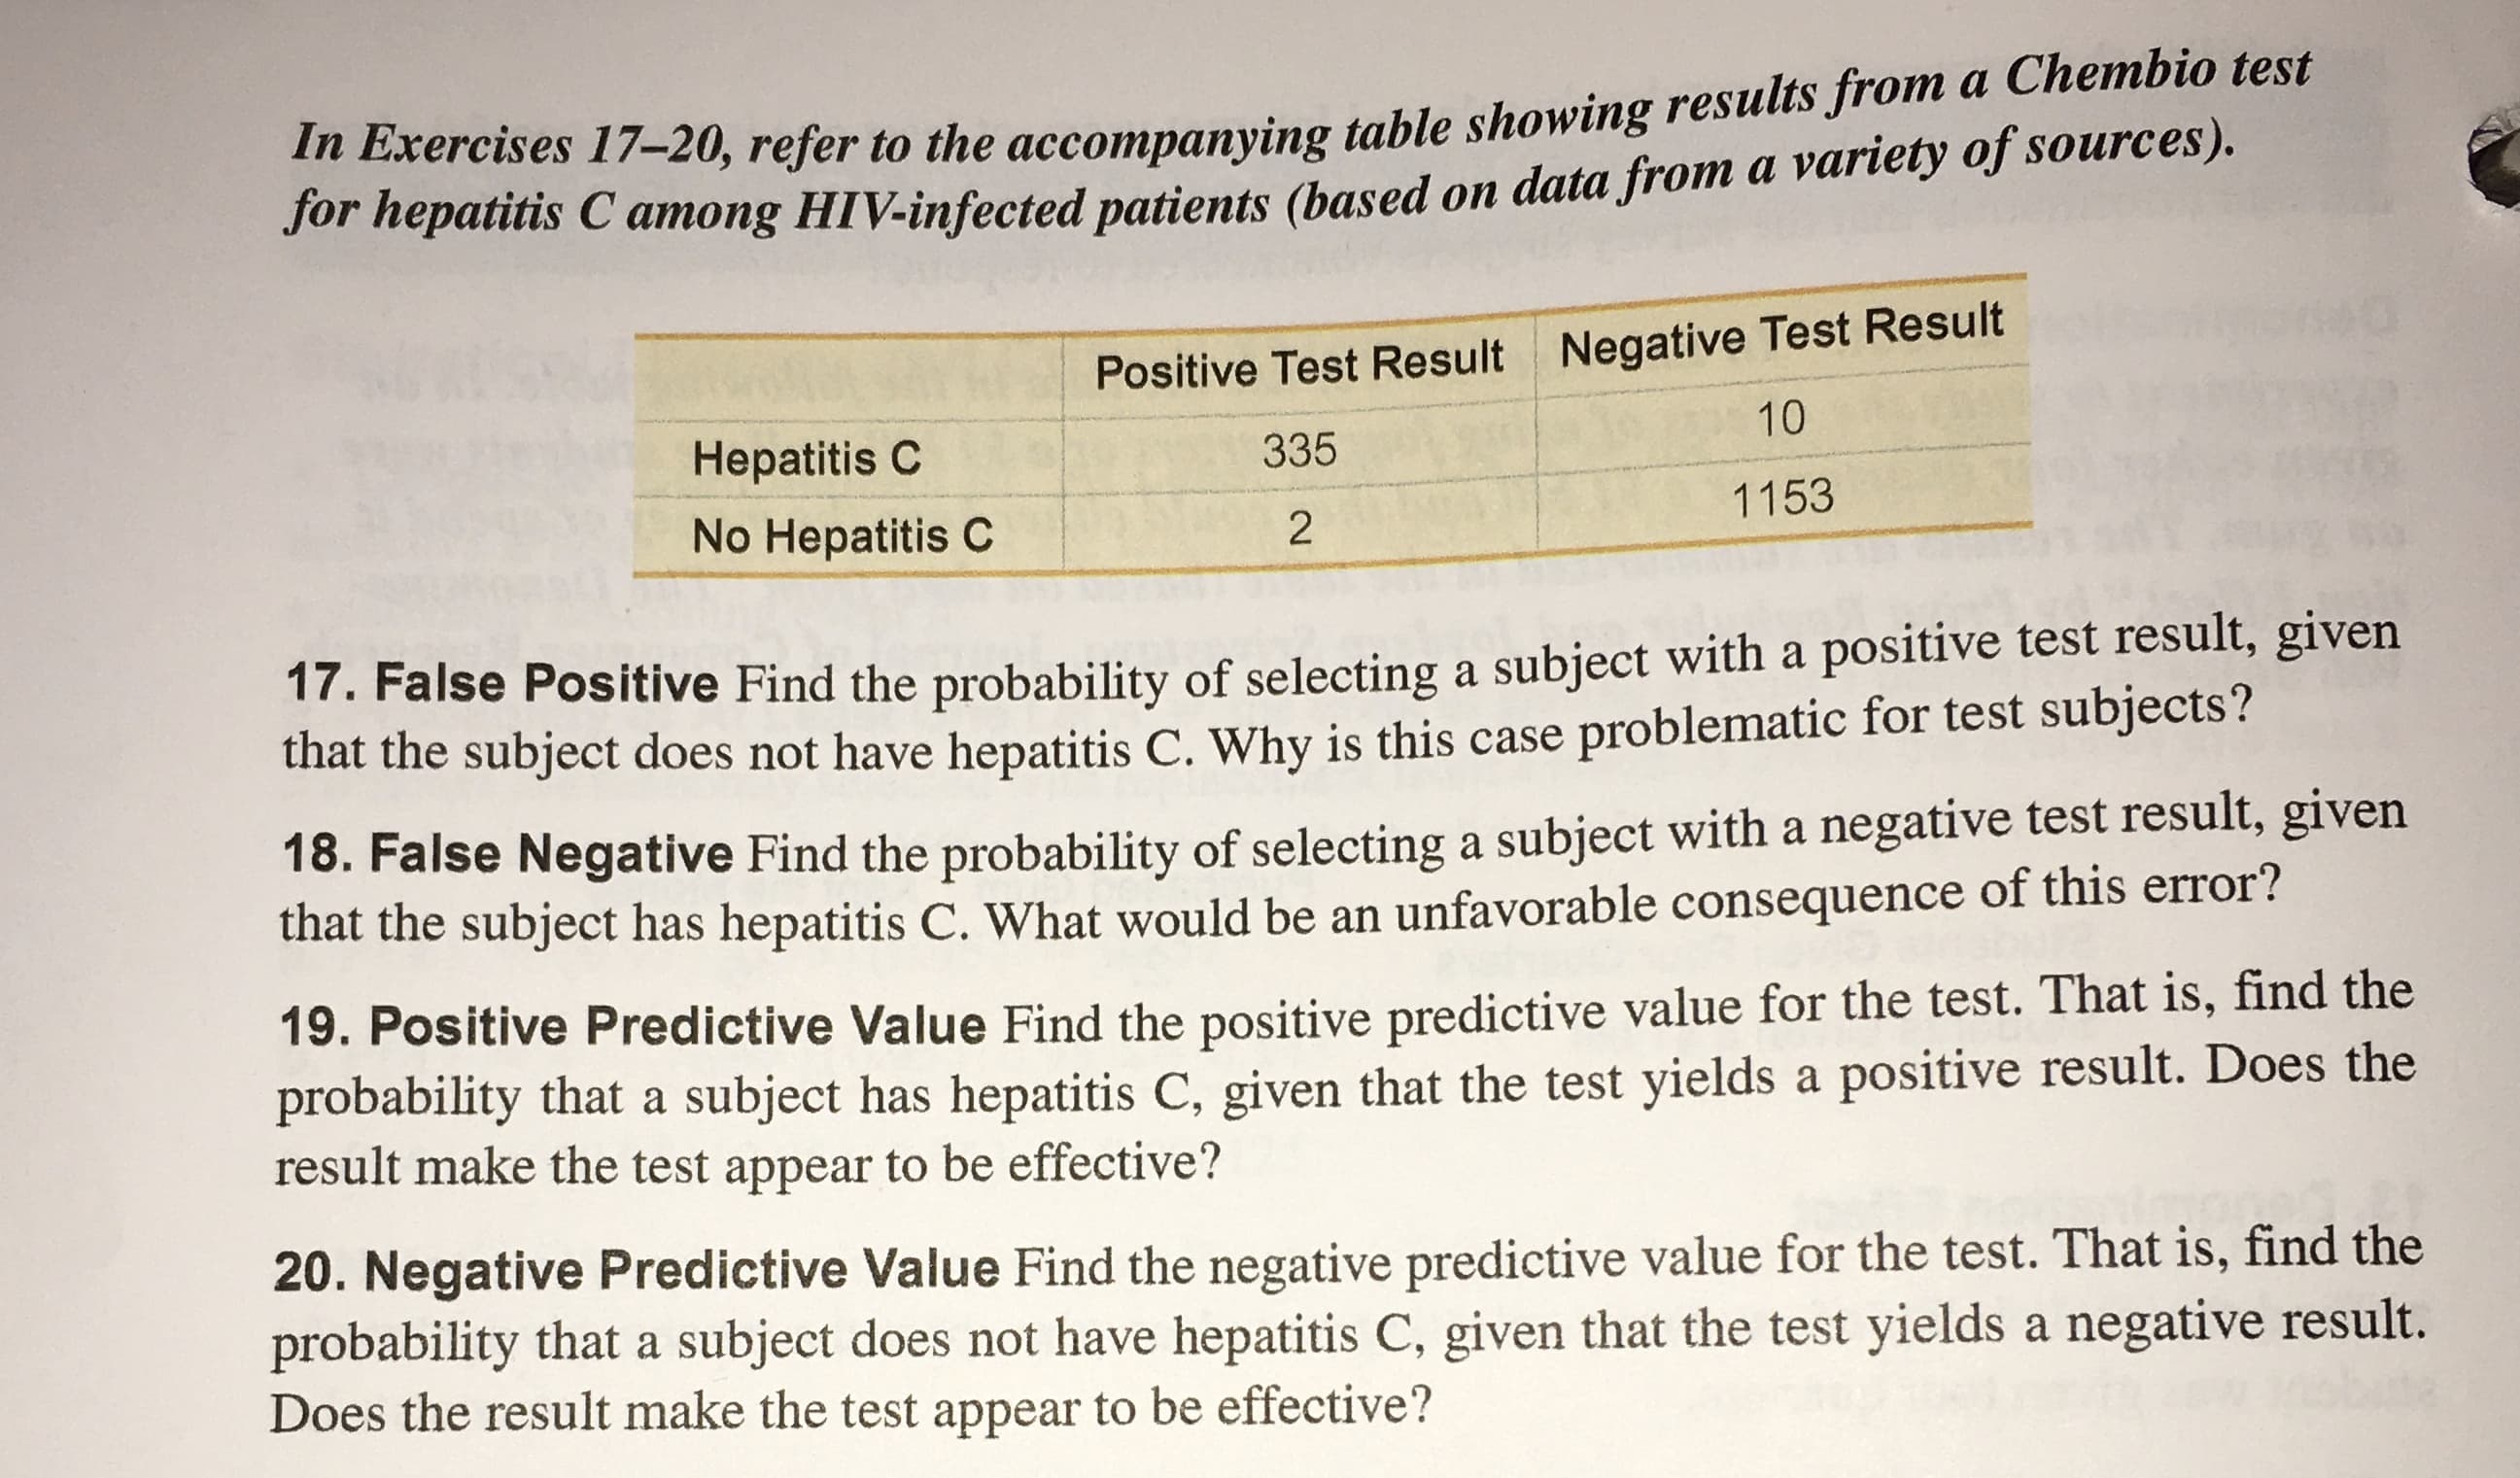 In Exercises 17-20, refer to the accompanying table showing results from a Chembio test
for hepatitis C among HIV-infected patients (based on data from a variety of sources).
Negative Test Result
Positive Test Result
10
Hepatitis C
335
1153
No Hepatitis C
2
17. False Positive Find the probability of selecting a subject with a positive test result, given
that the subject does not have hepatitis C. Why is this case problematic for test subjects?
18. False Negative Find the probability of selecting a subject with a negative test result, given
that the subject has hepatitis C. What would be an unfavorable consequence of this error?
19. Positive Predictive Value Find the positive predictive value for the test. That is, find the
probability that a subject has hepatitis C, given that the test yields a positive result. Does the
result make the test appear to be effective?
20. Negative Predictive Value Find the negative predictive value for the test. That is, find the
probability that a subject does not have hepatitis C, given that the test yields a negative result.
Does the result make the test appear to be effective?
